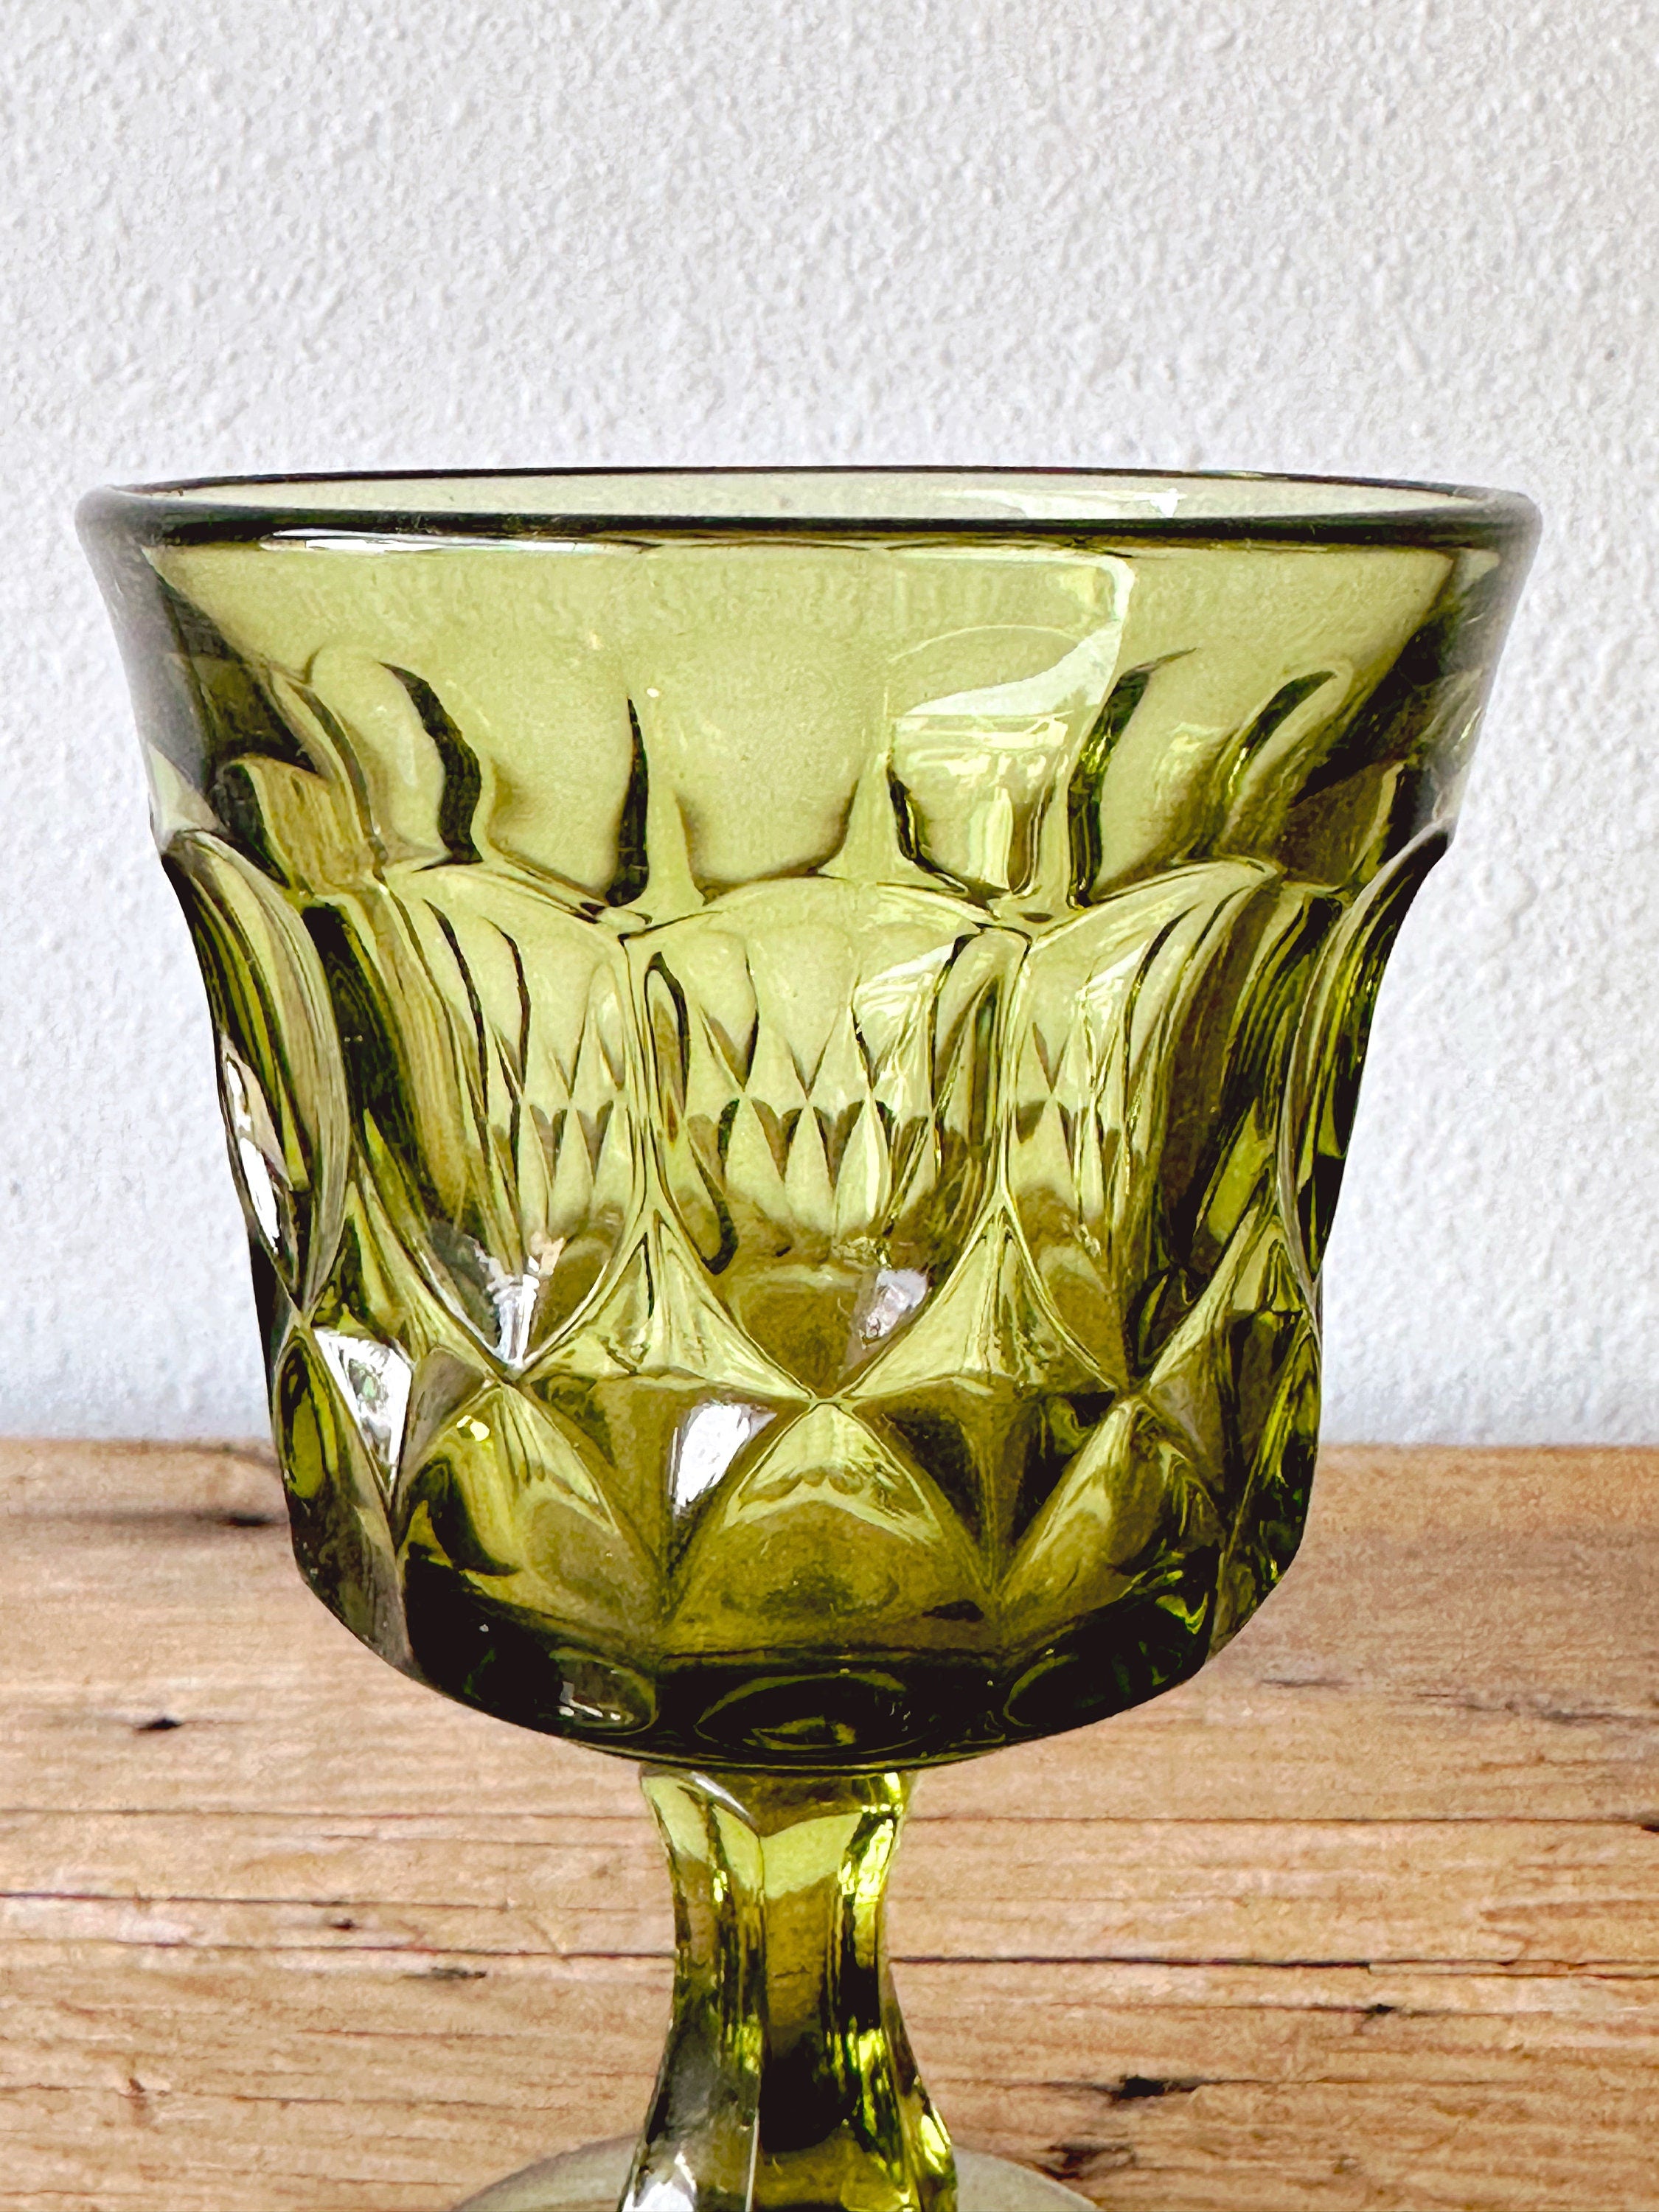 Vintage 1970s Noritake Perspective Small Avocado Green Goblets in Set of 2, 4, 6 or 8 | Mid Century Wine or Cordial Glasses | Gift for Her